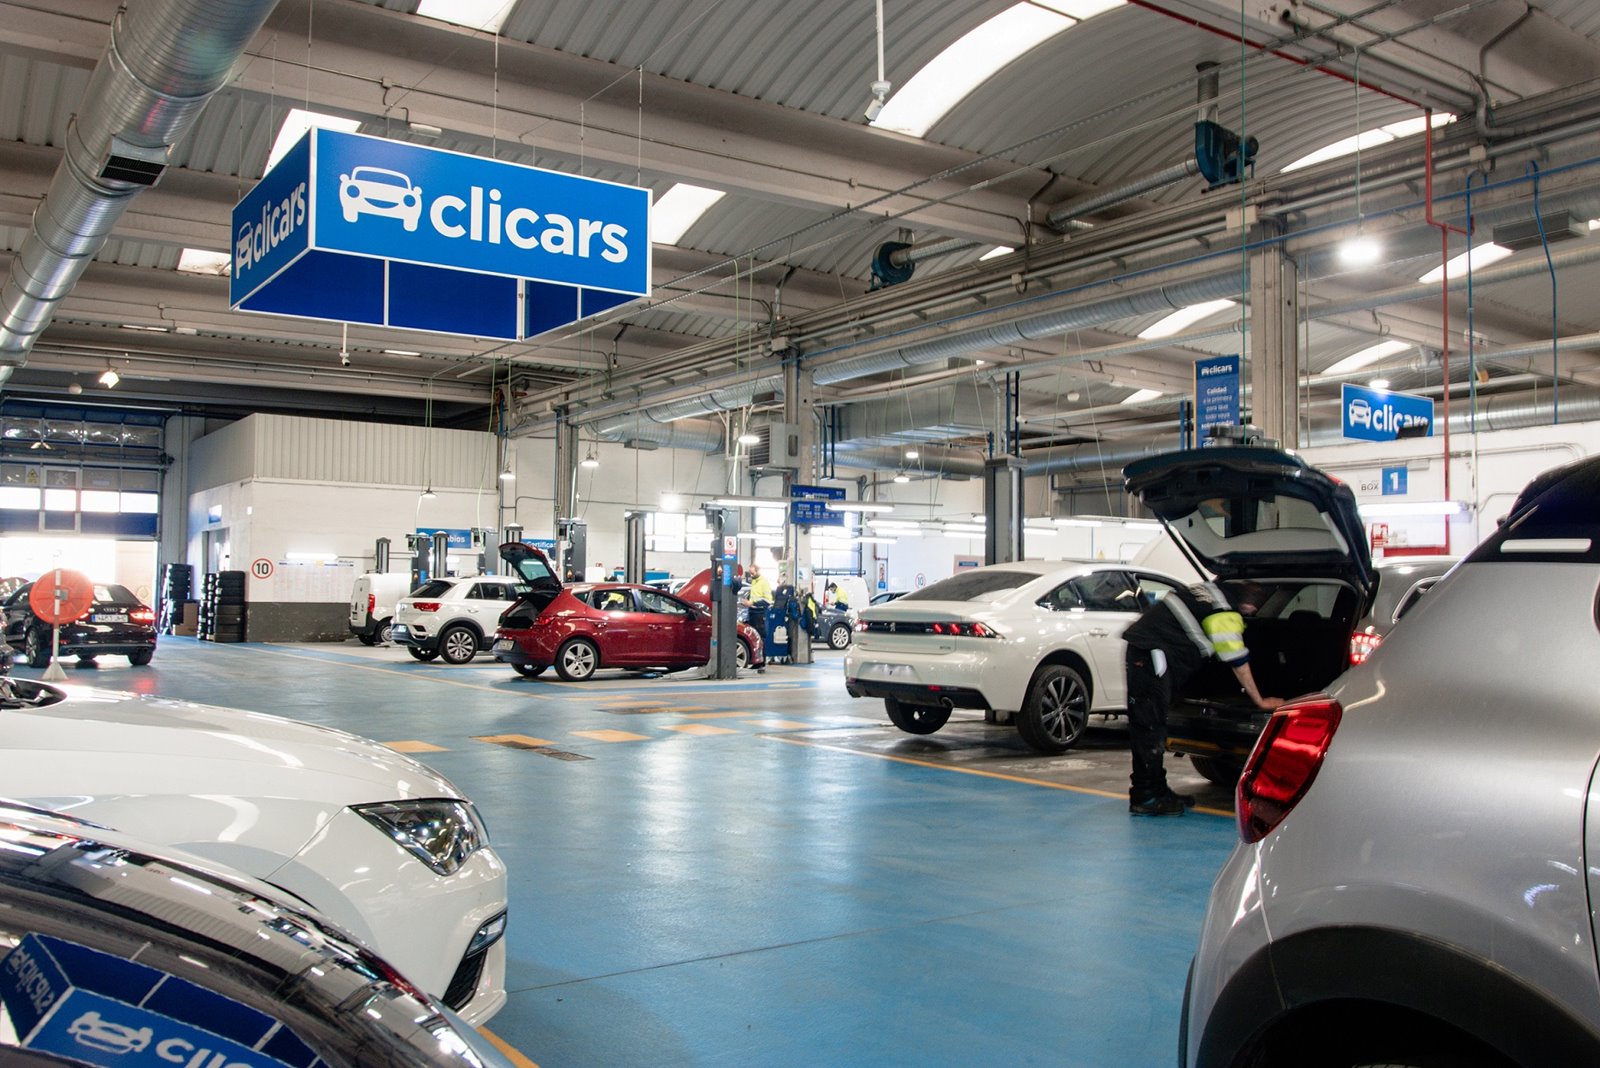 We know the Clicars facilities: leaders in six years